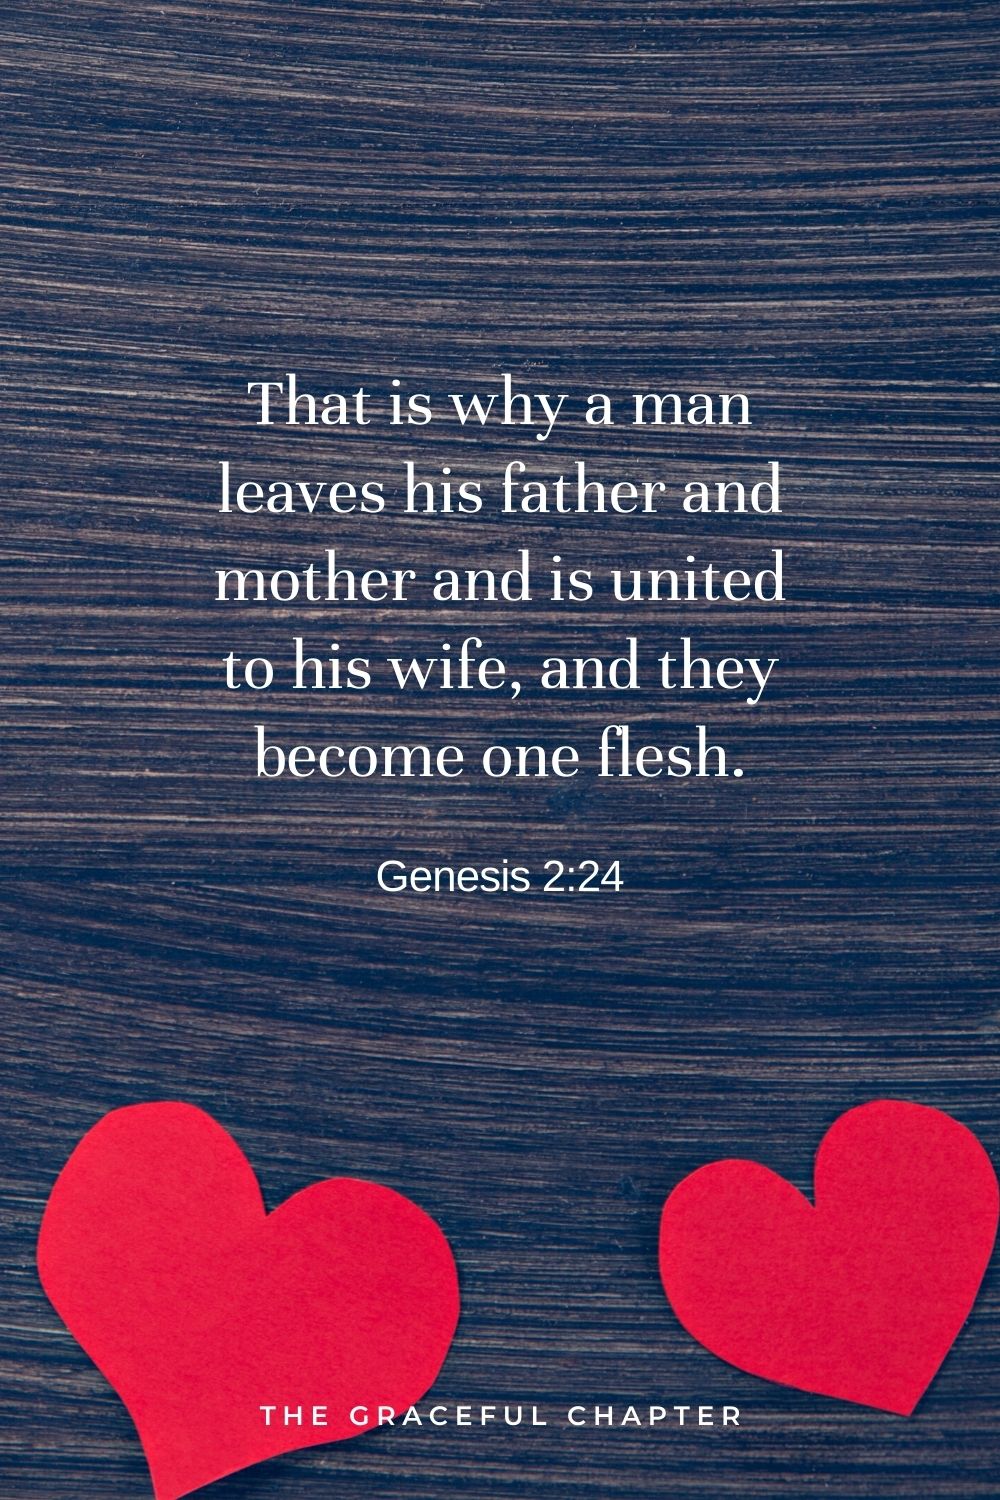 That is why a man leaves his father and mother and is united to his wife, and they become one flesh. Genesis 2:24